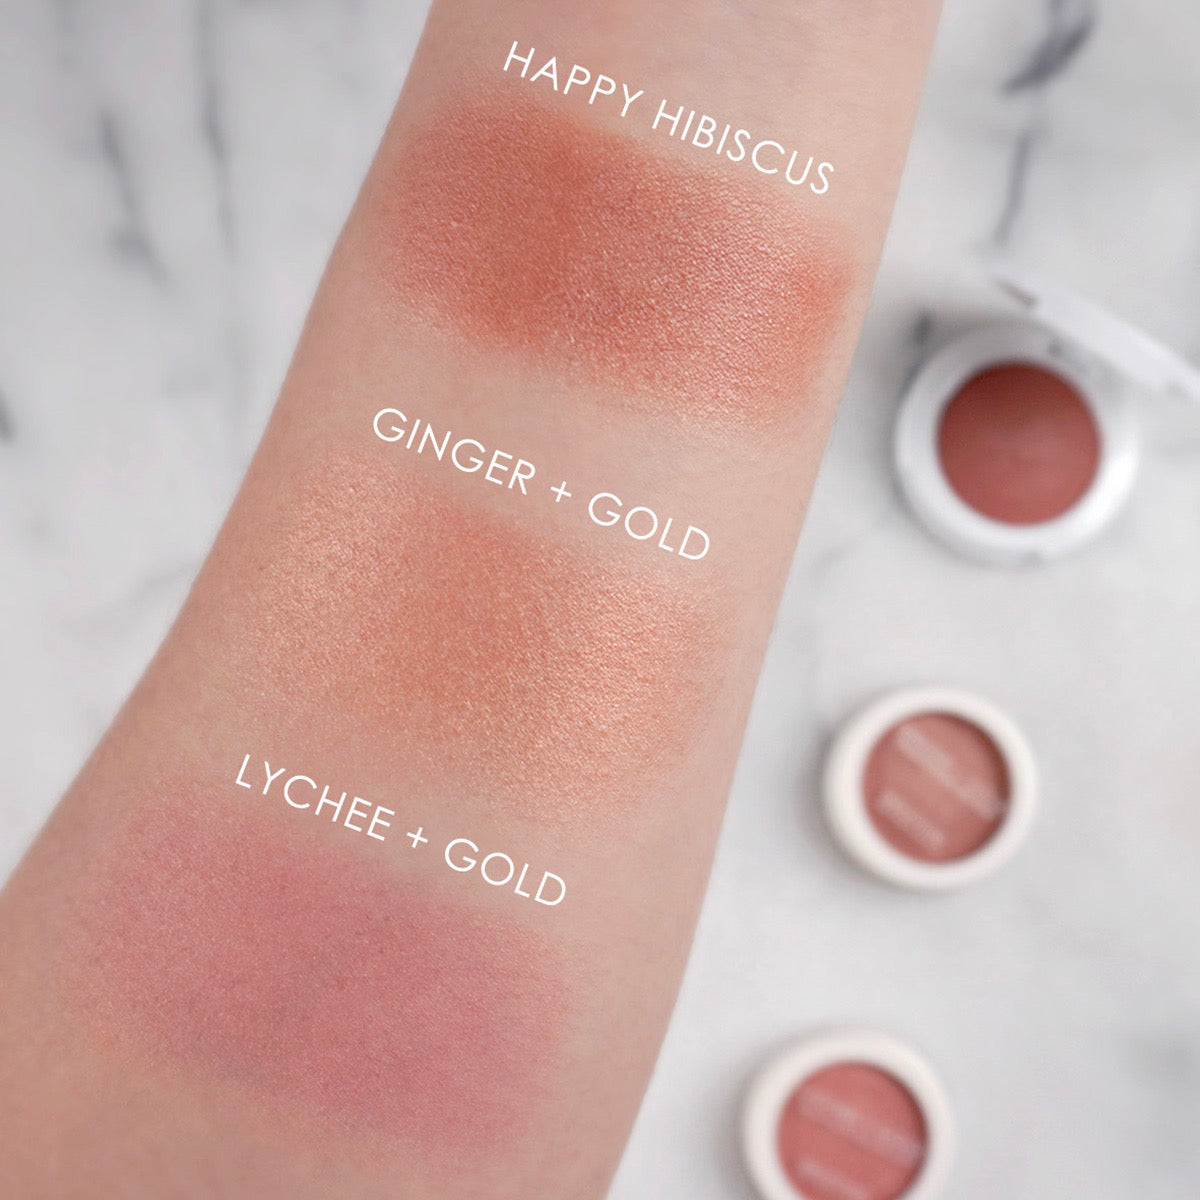 Happy Hibiscus - 99% Natural Blush For All Skin Tones